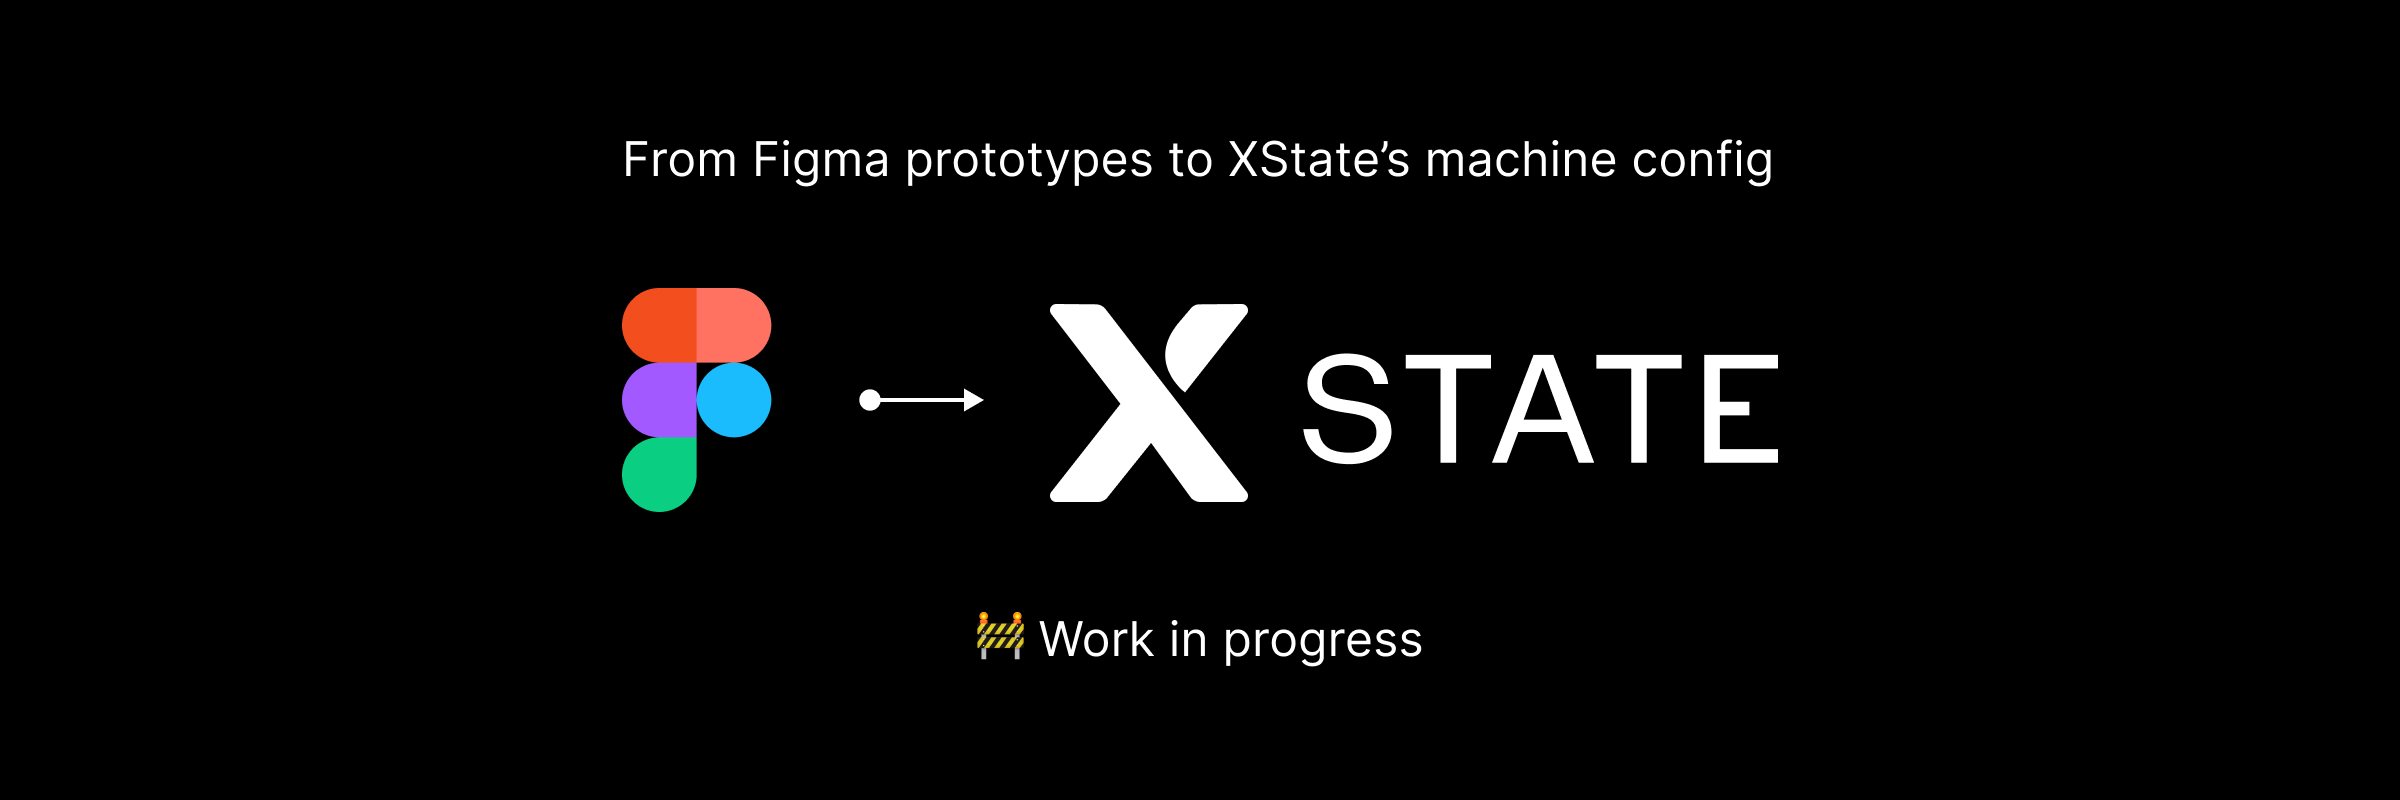 Plugin's logo reporting "From Figma prototypes to XState’s machine config"